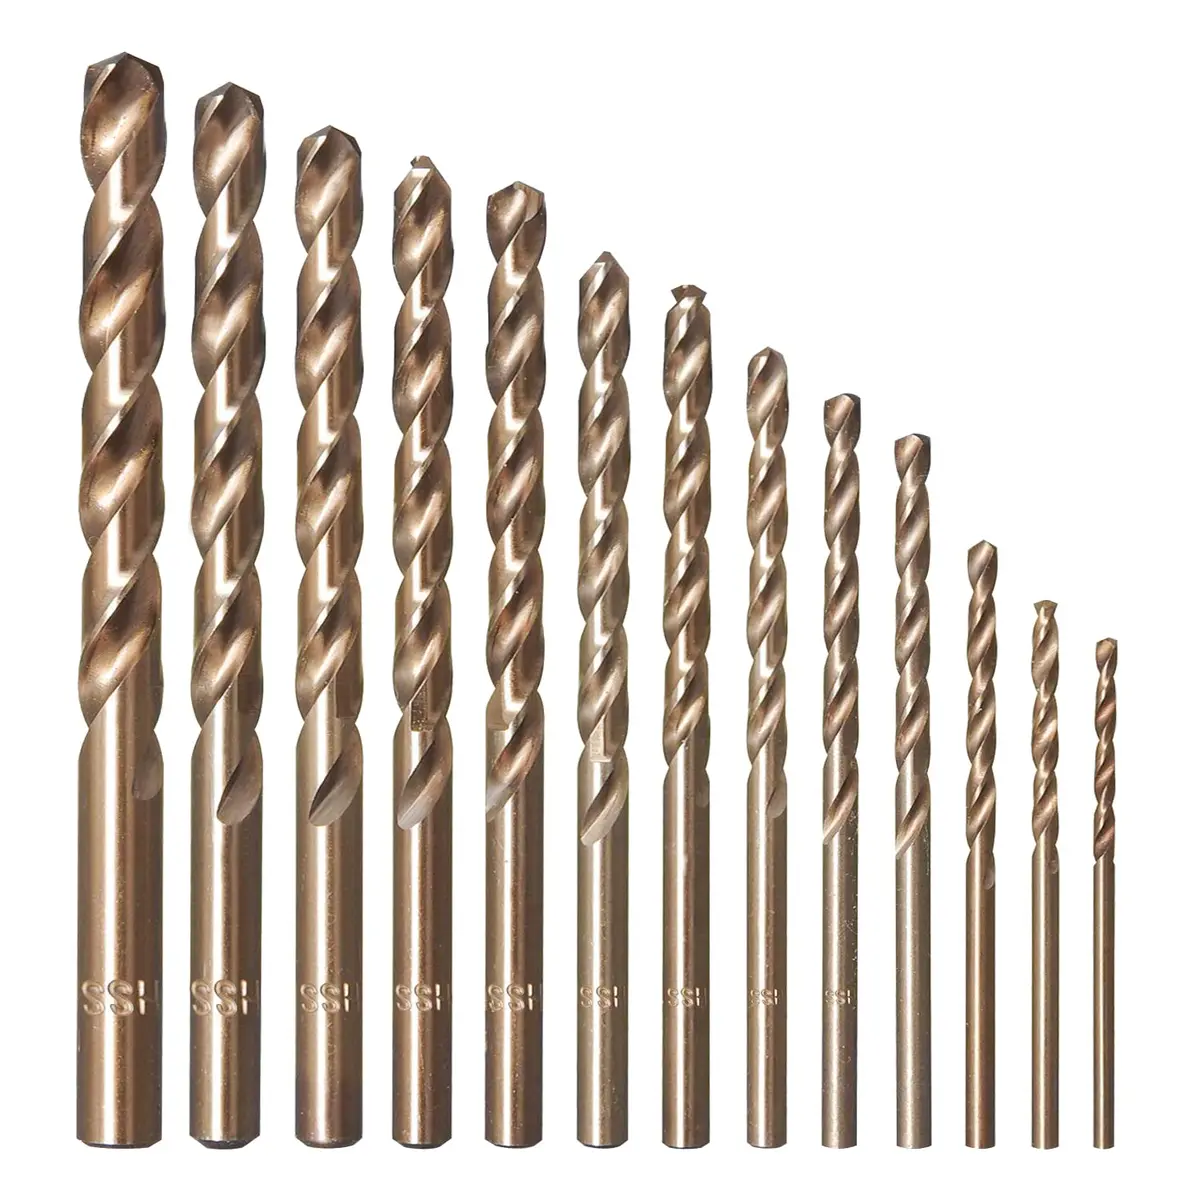 Cobalt drill bits for DIY enthusiasts: Essential additions to your toolbox